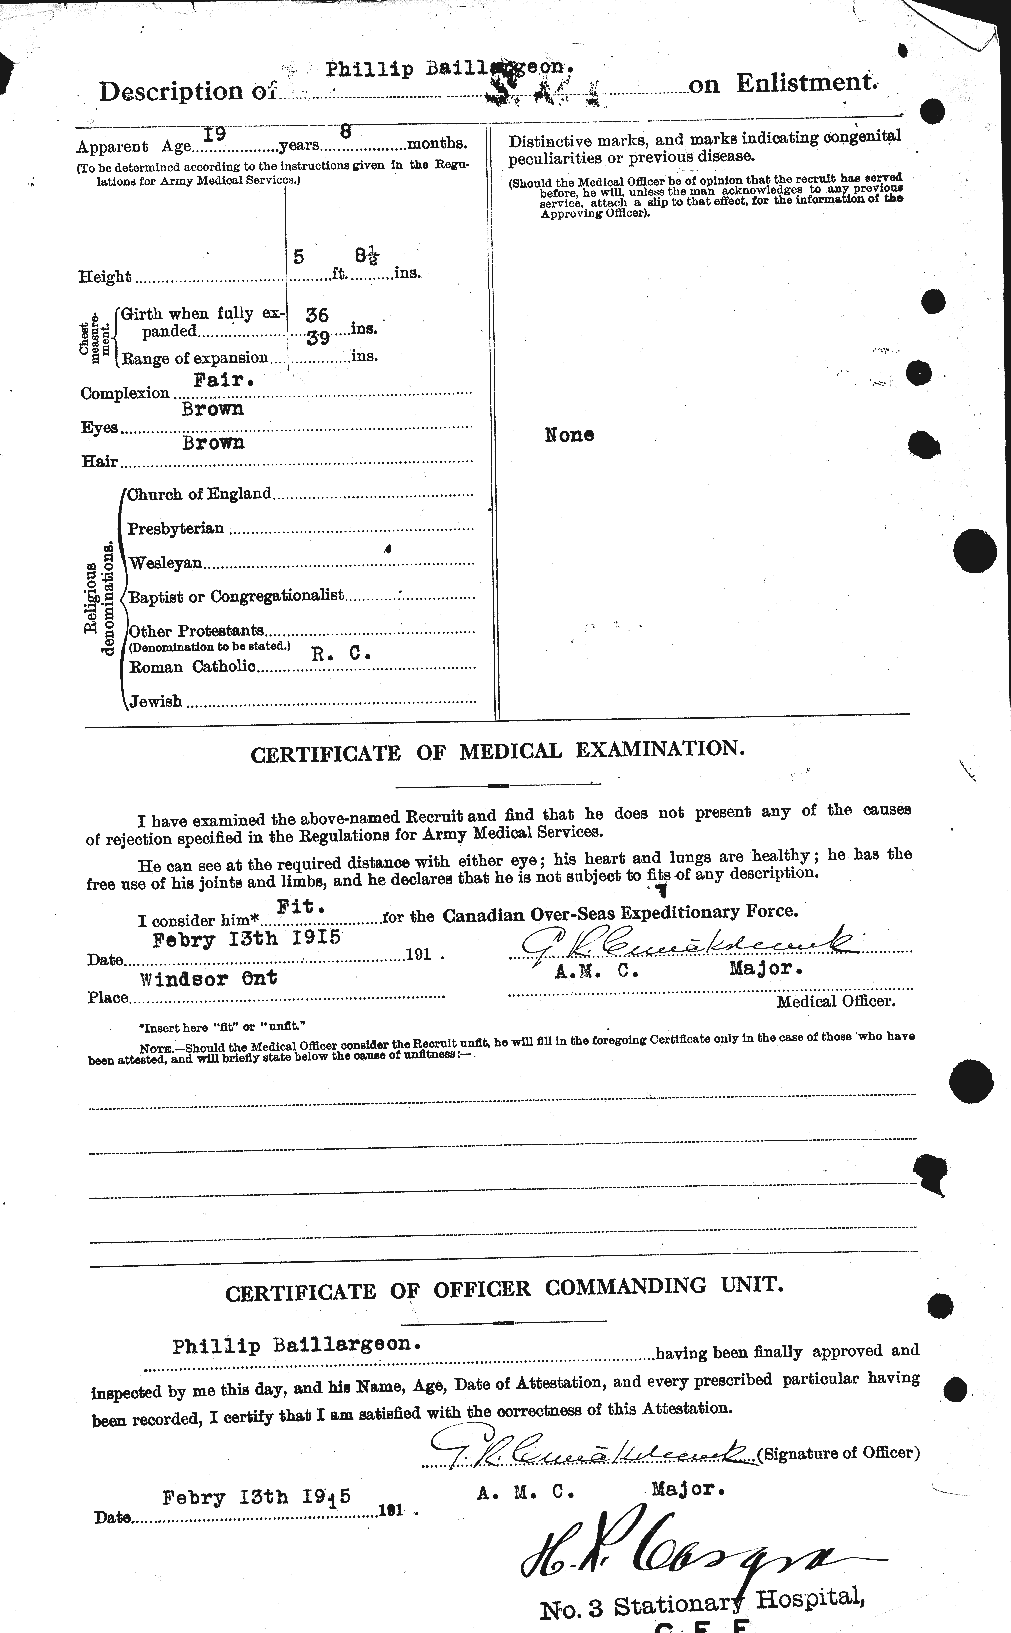 Personnel Records of the First World War - CEF 226283b